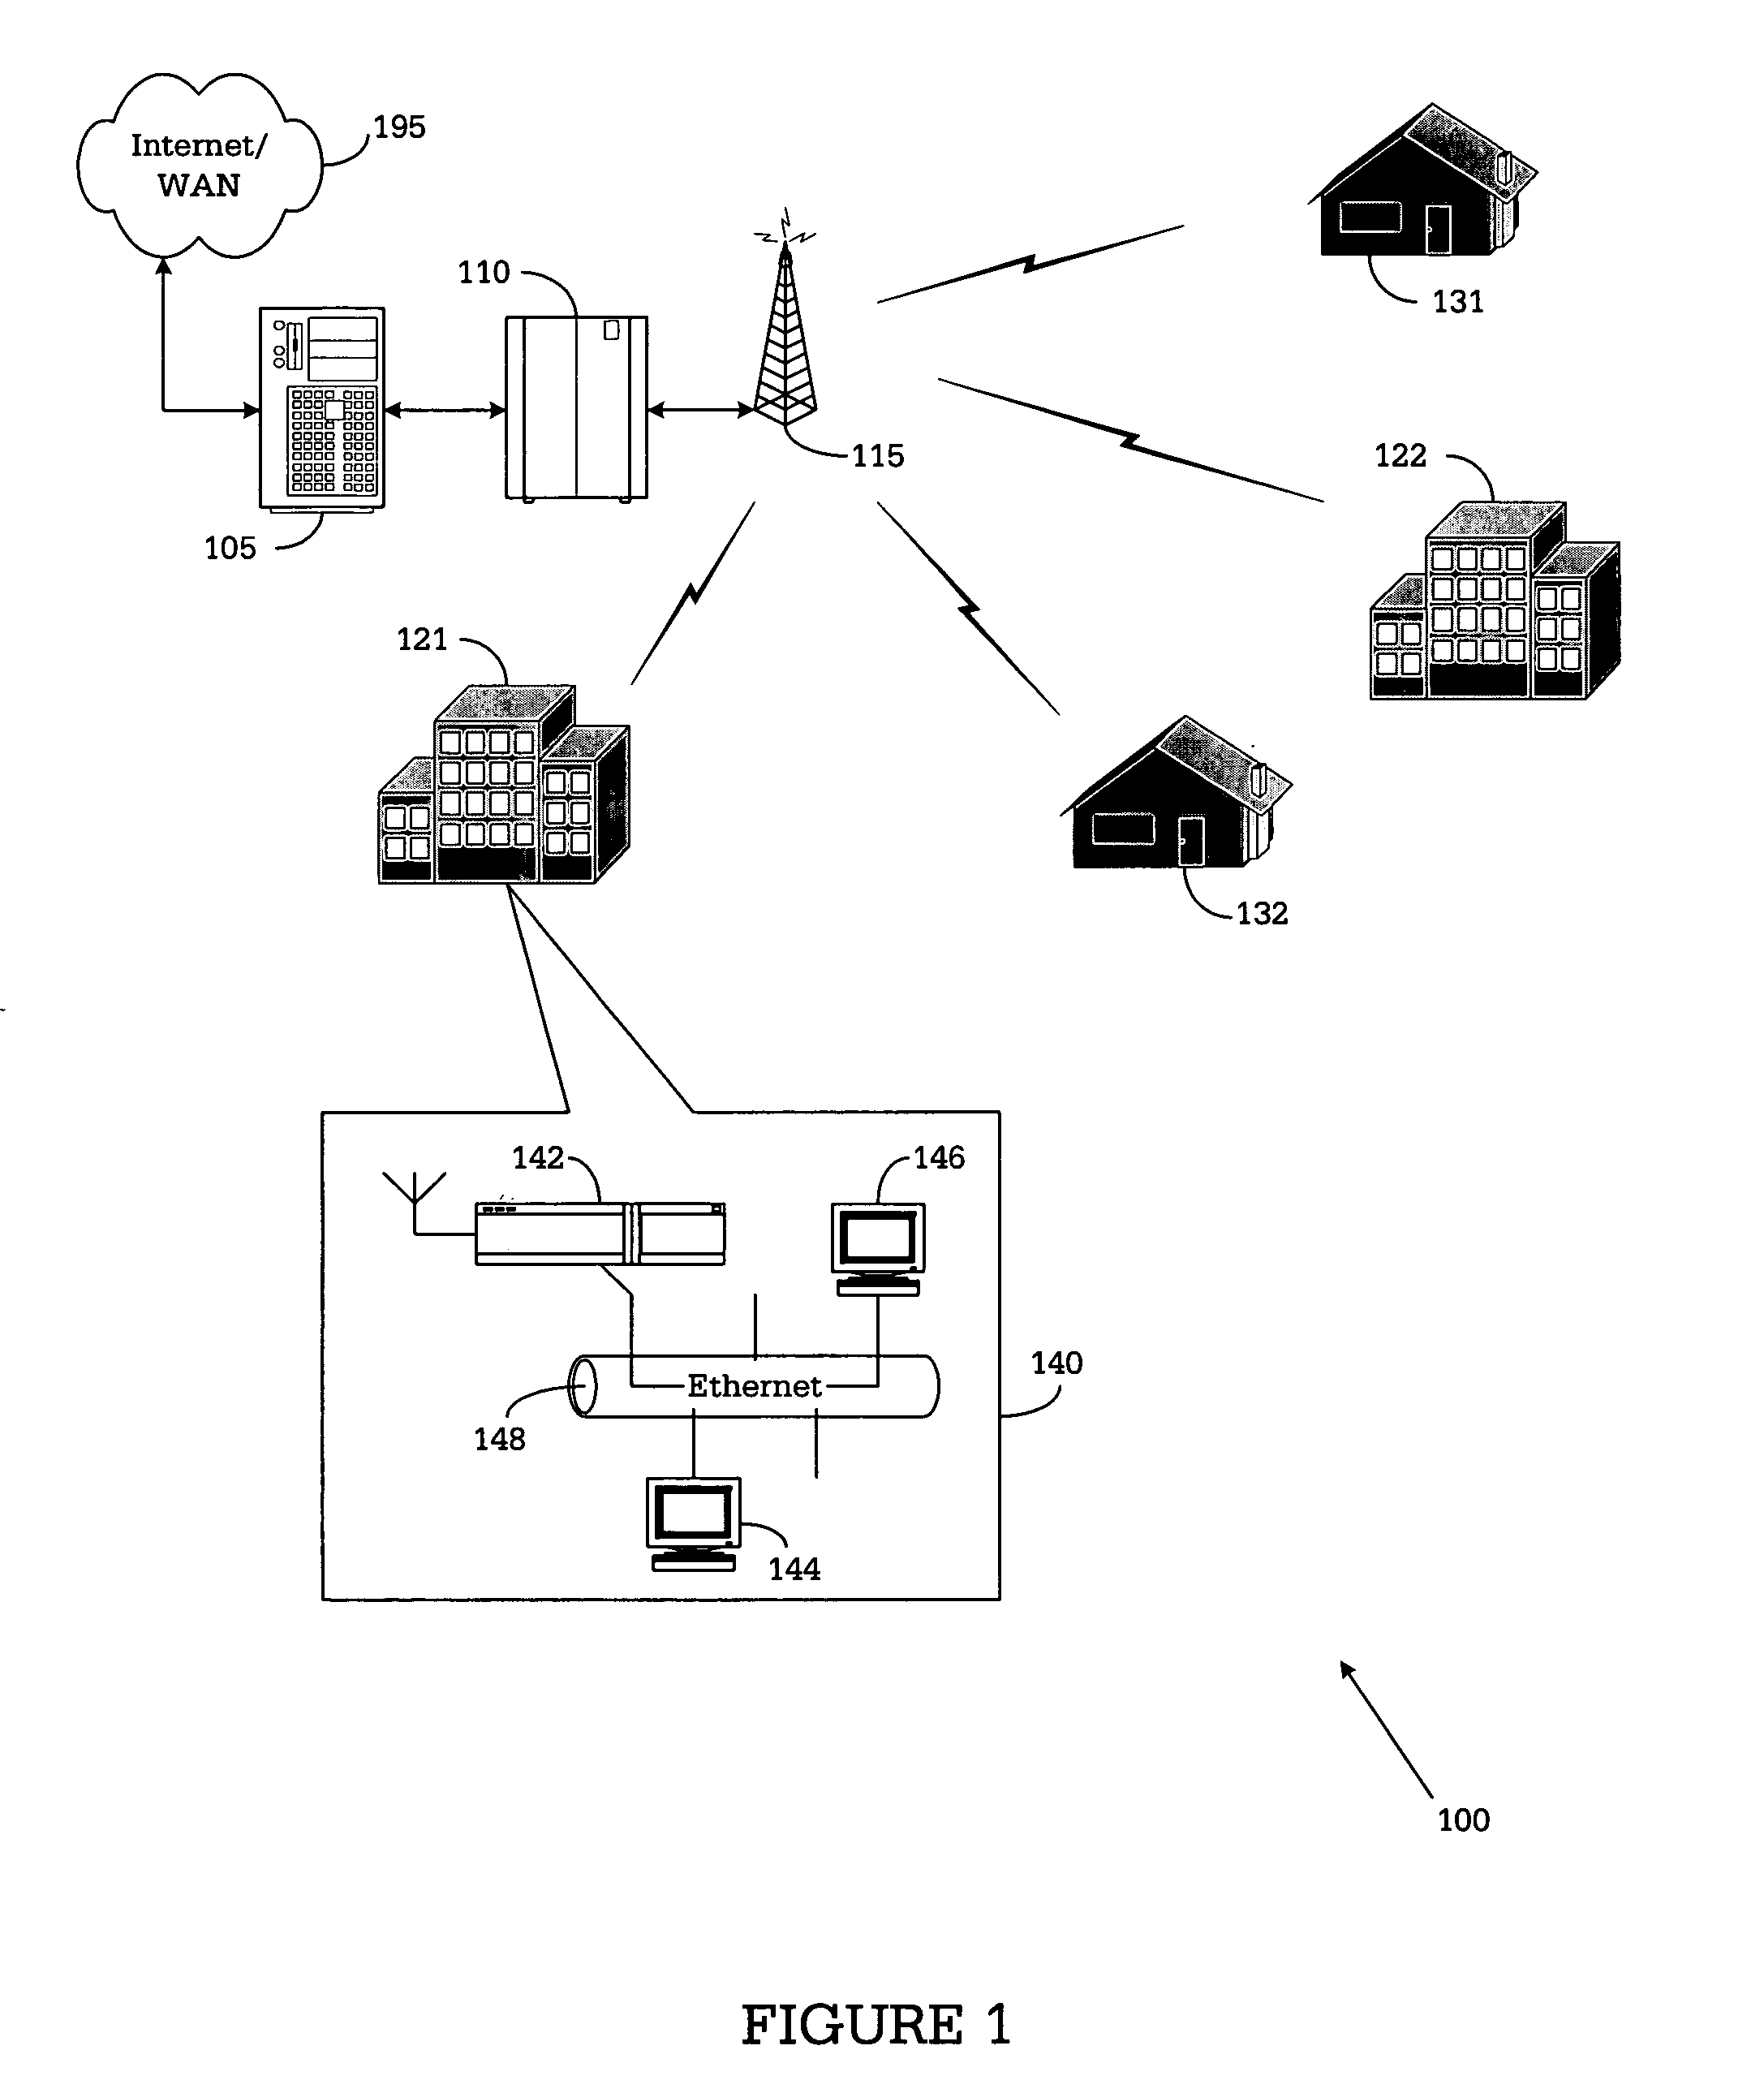 MAC layer protocol for a wireless DSL network